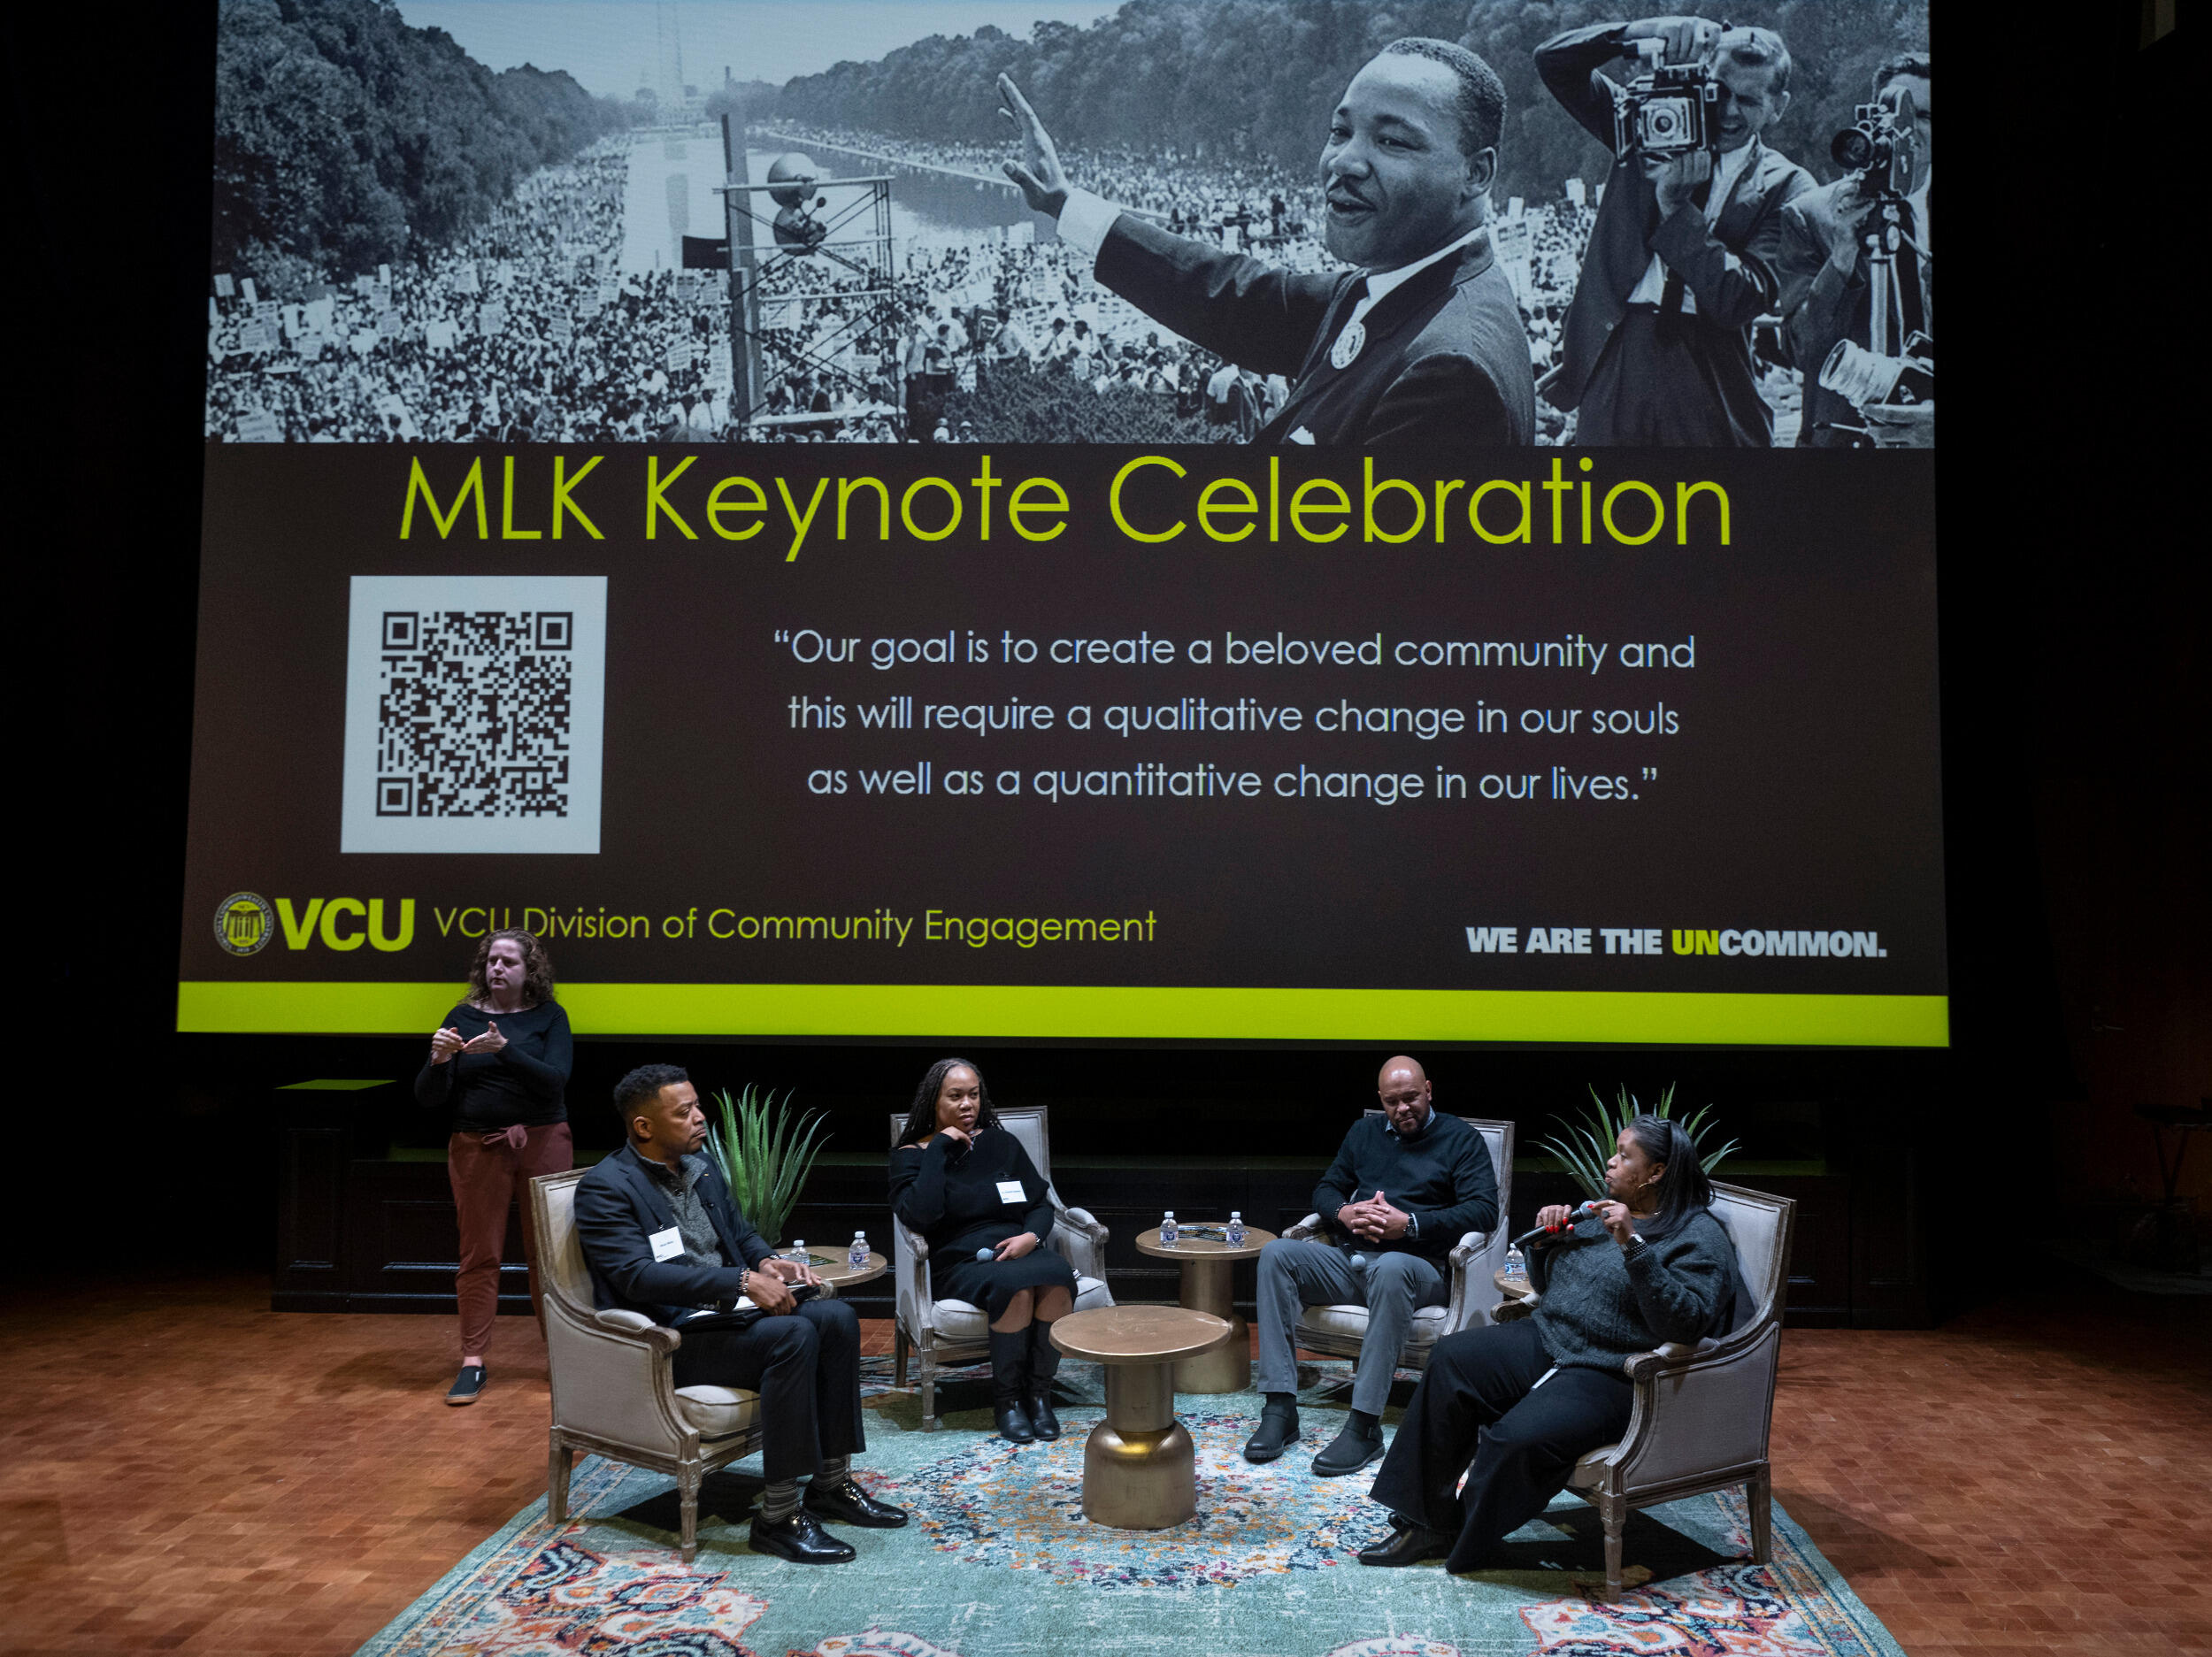 Speakers sit on stage in a semi-circle with an image of Martin Luther King Jr. on the projection screen behind them.